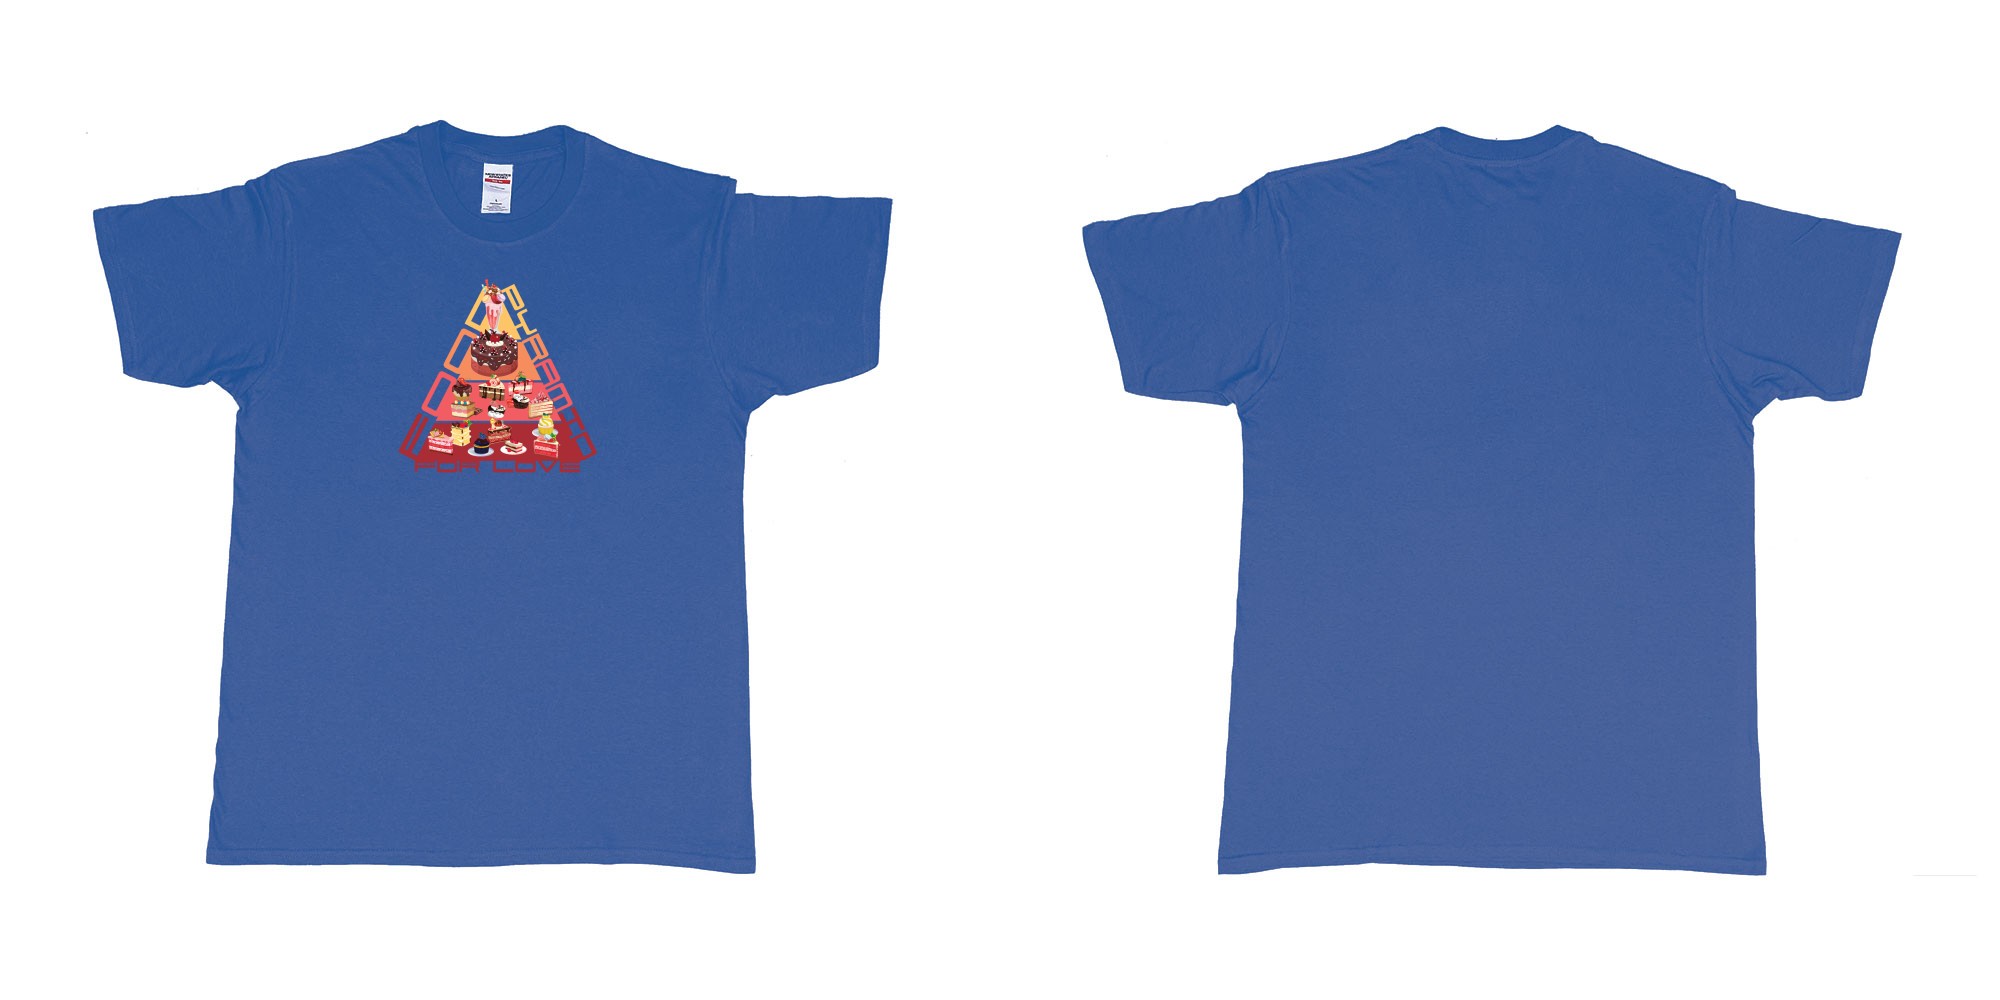 Custom tshirt design food pyramid for love in fabric color royal-blue choice your own text made in Bali by The Pirate Way